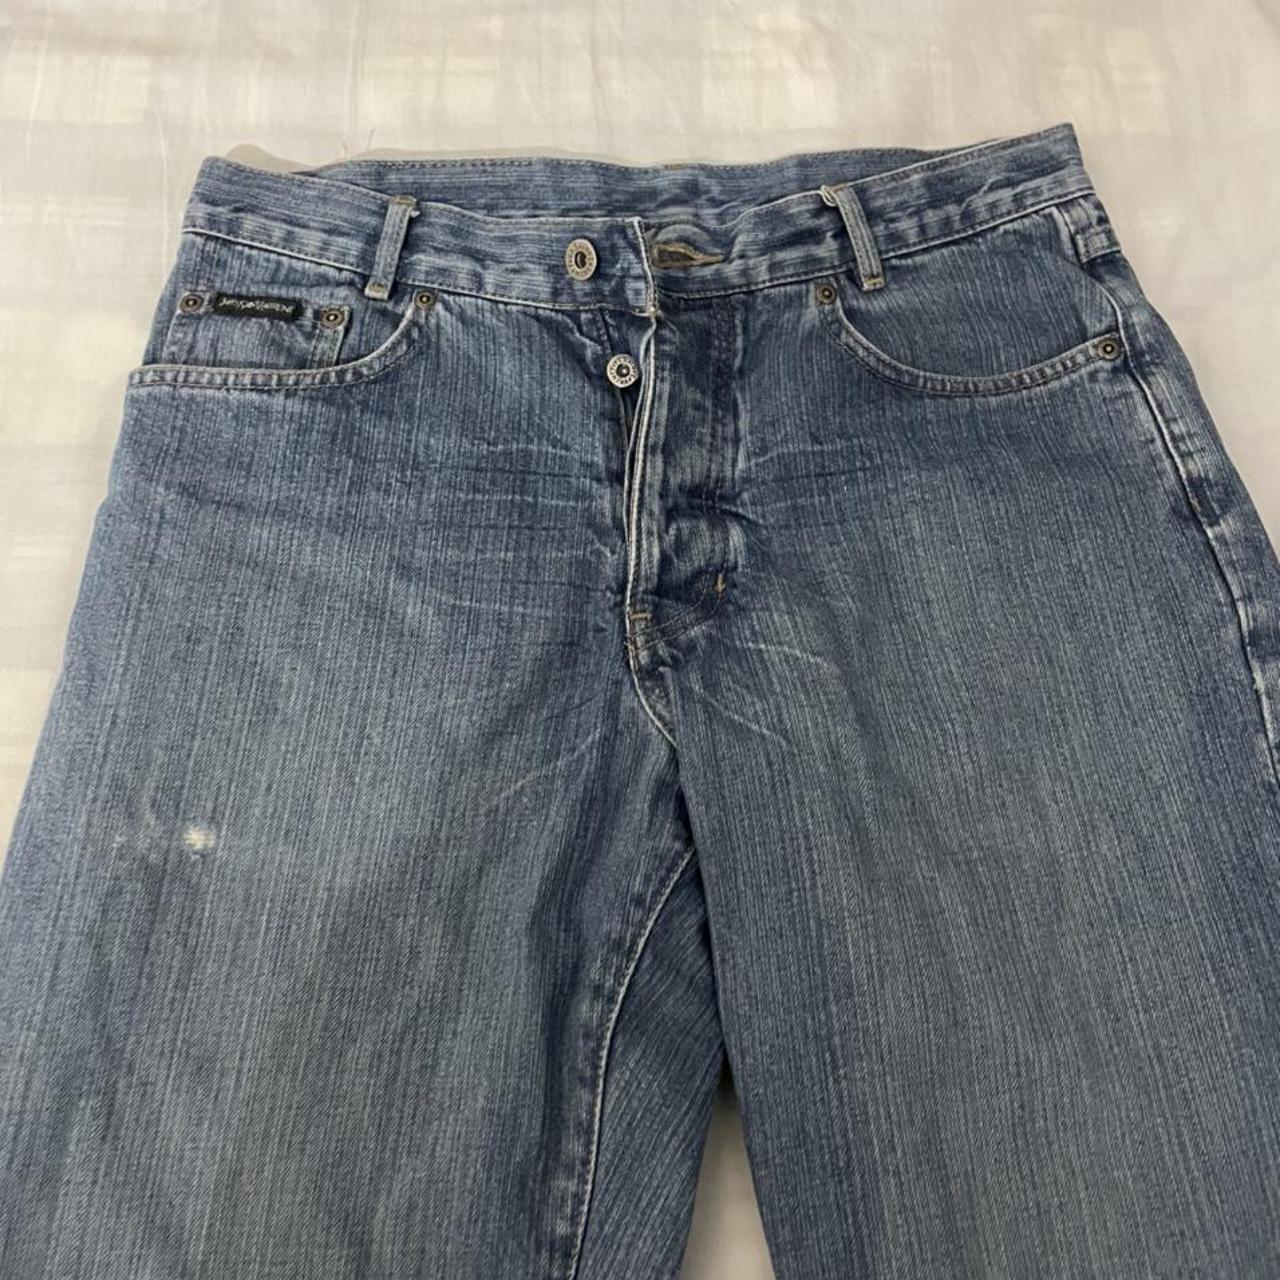 SOLD DO NOT BUY YSL Baggy jeans, great condition... - Depop